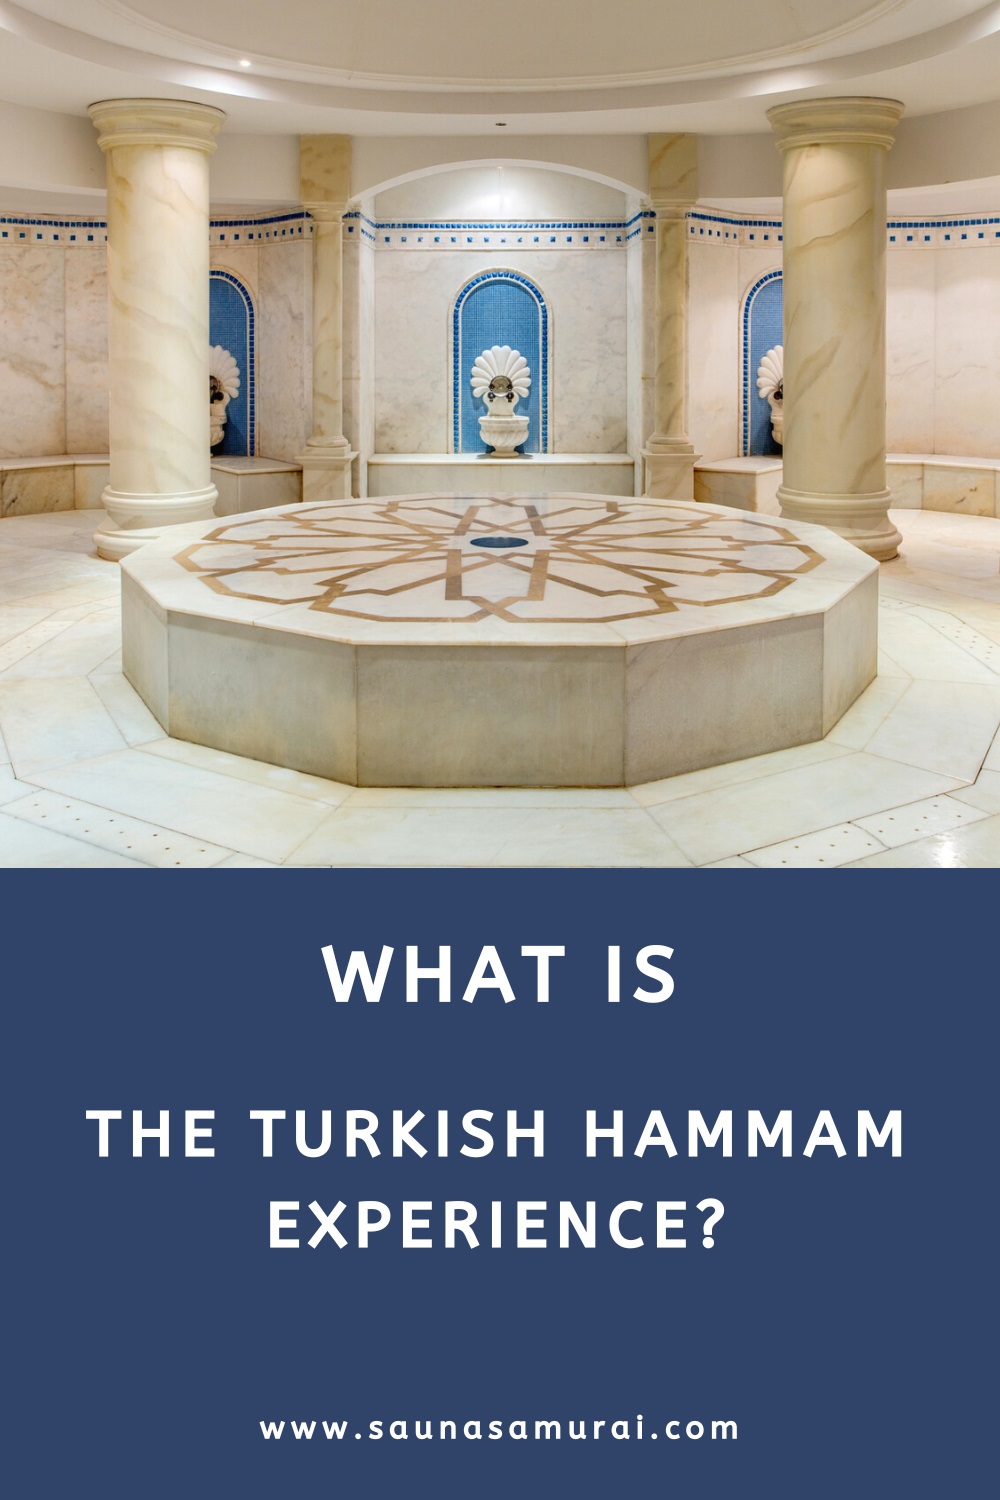 What is the Turkish Hammam experience?